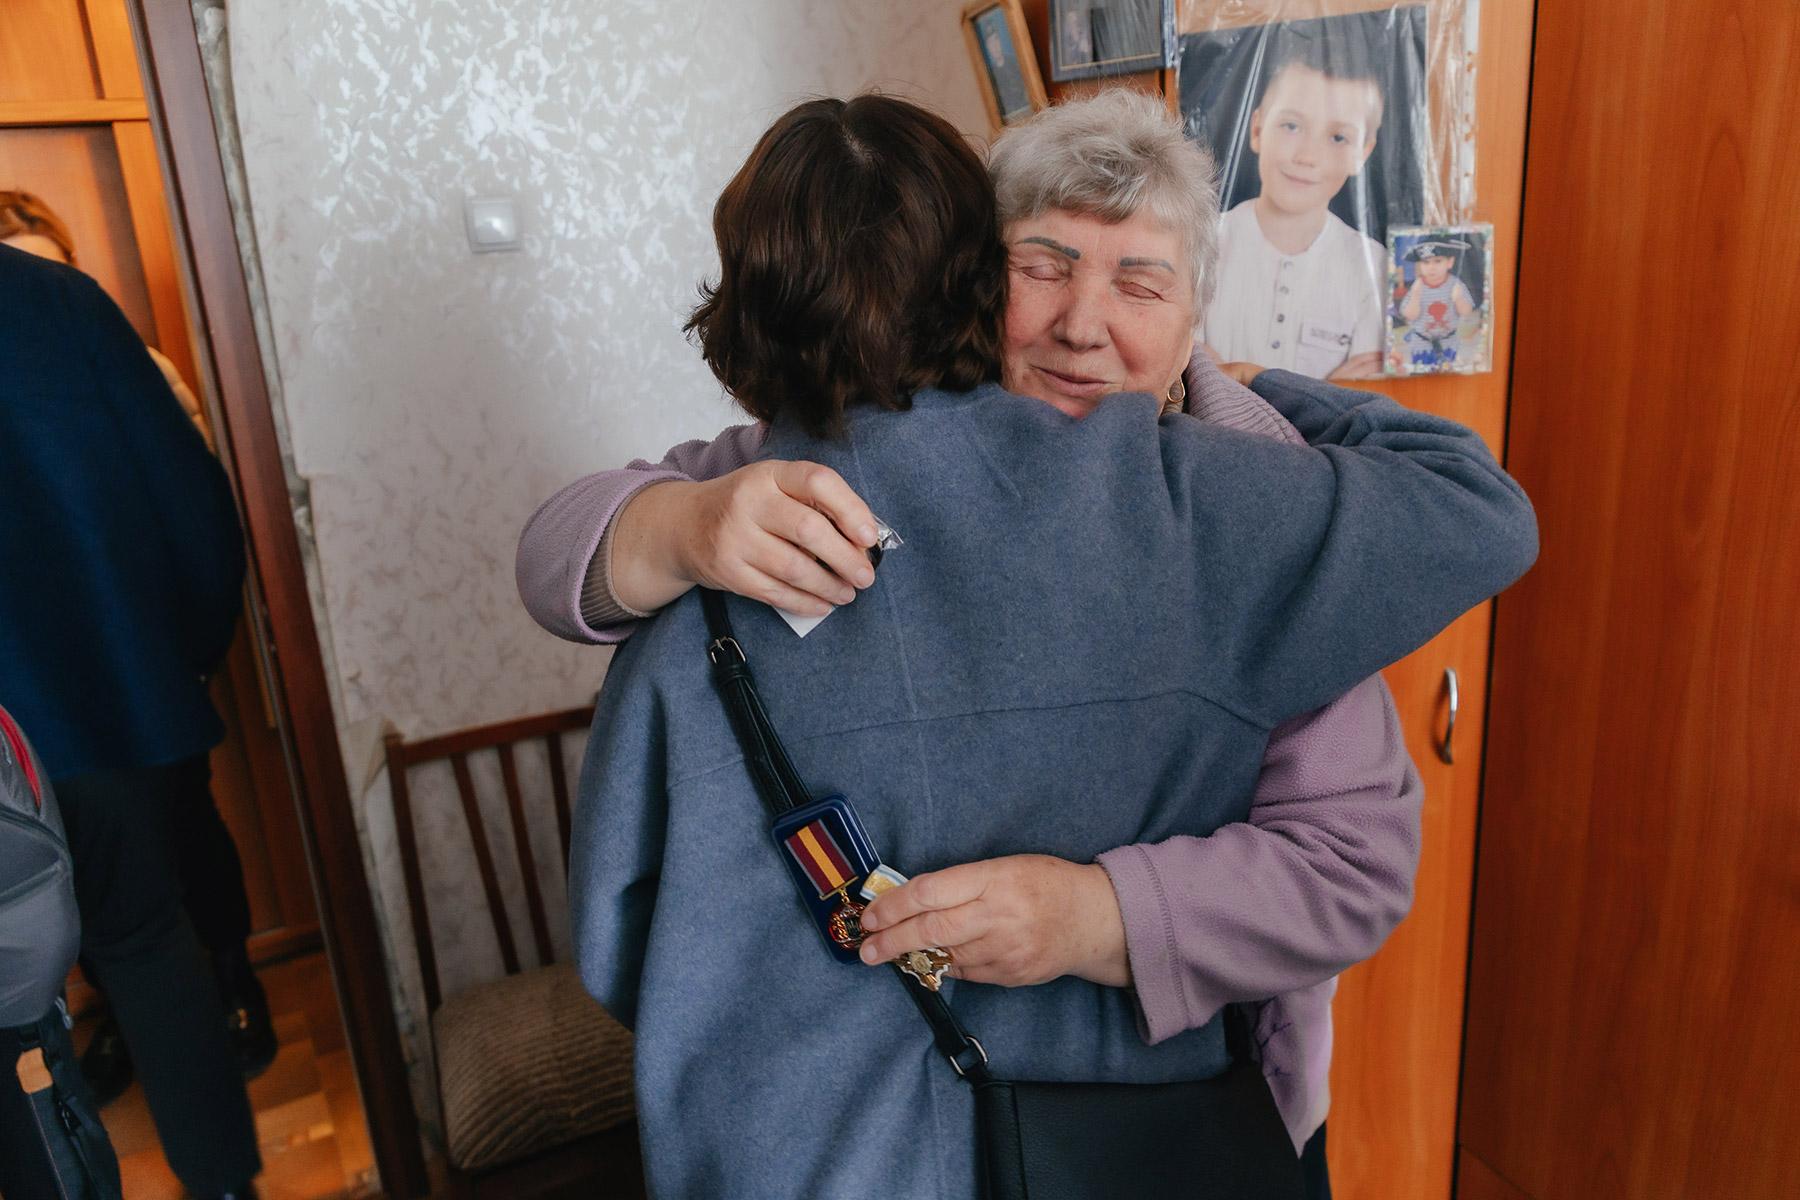 Maria Ivaninvna from Kharkiv hugs LWF General Secretary Rev. Dr Anne Burghardt on the solidarity visit on 14 May 2024. Ivanivna's apartment was hit by a missile in 2022 and rehabiliated by LWF. Behind her are the pictures of her sons, who are fighting in the army, and her grandson. Photo: LWF/ Anatolyi Nazarenko